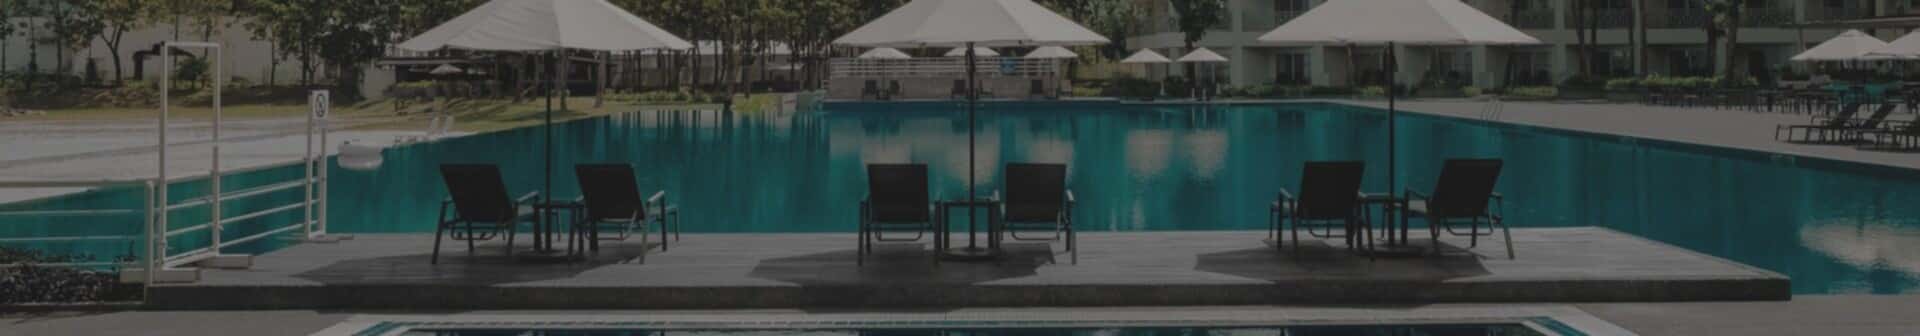 A swimming pool with chairs and umbrellas next to it.